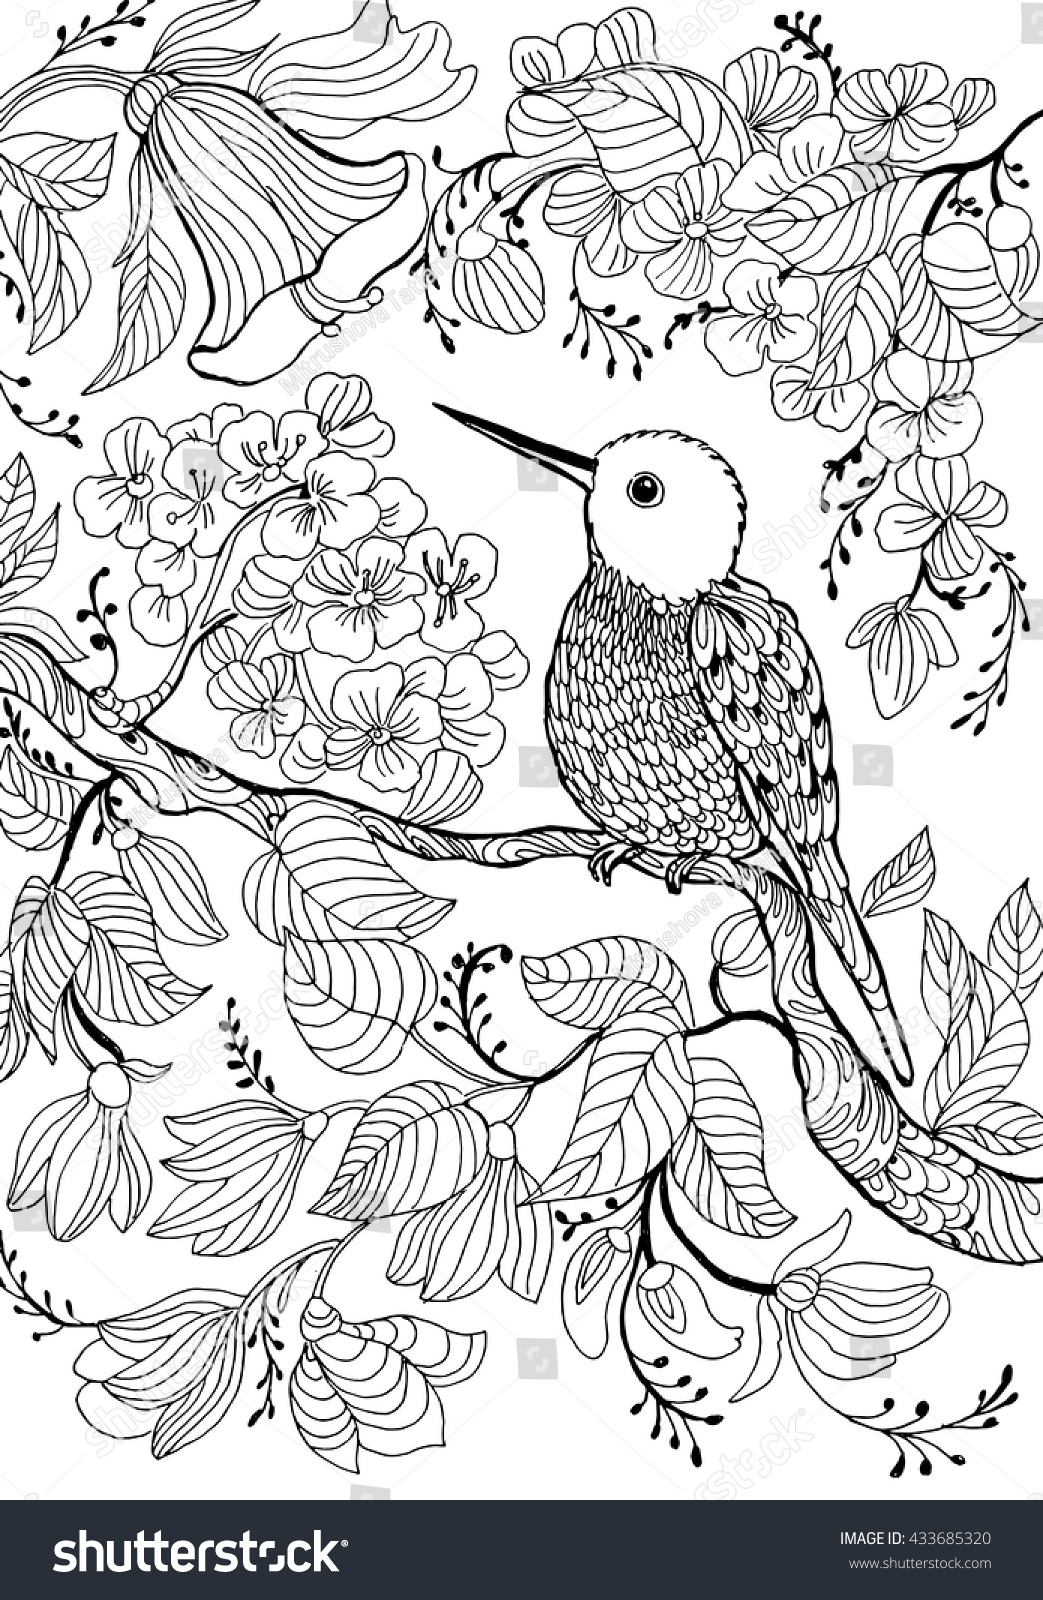 hummingbirds and flowers outline drawing coloring circling line drawing monochrome